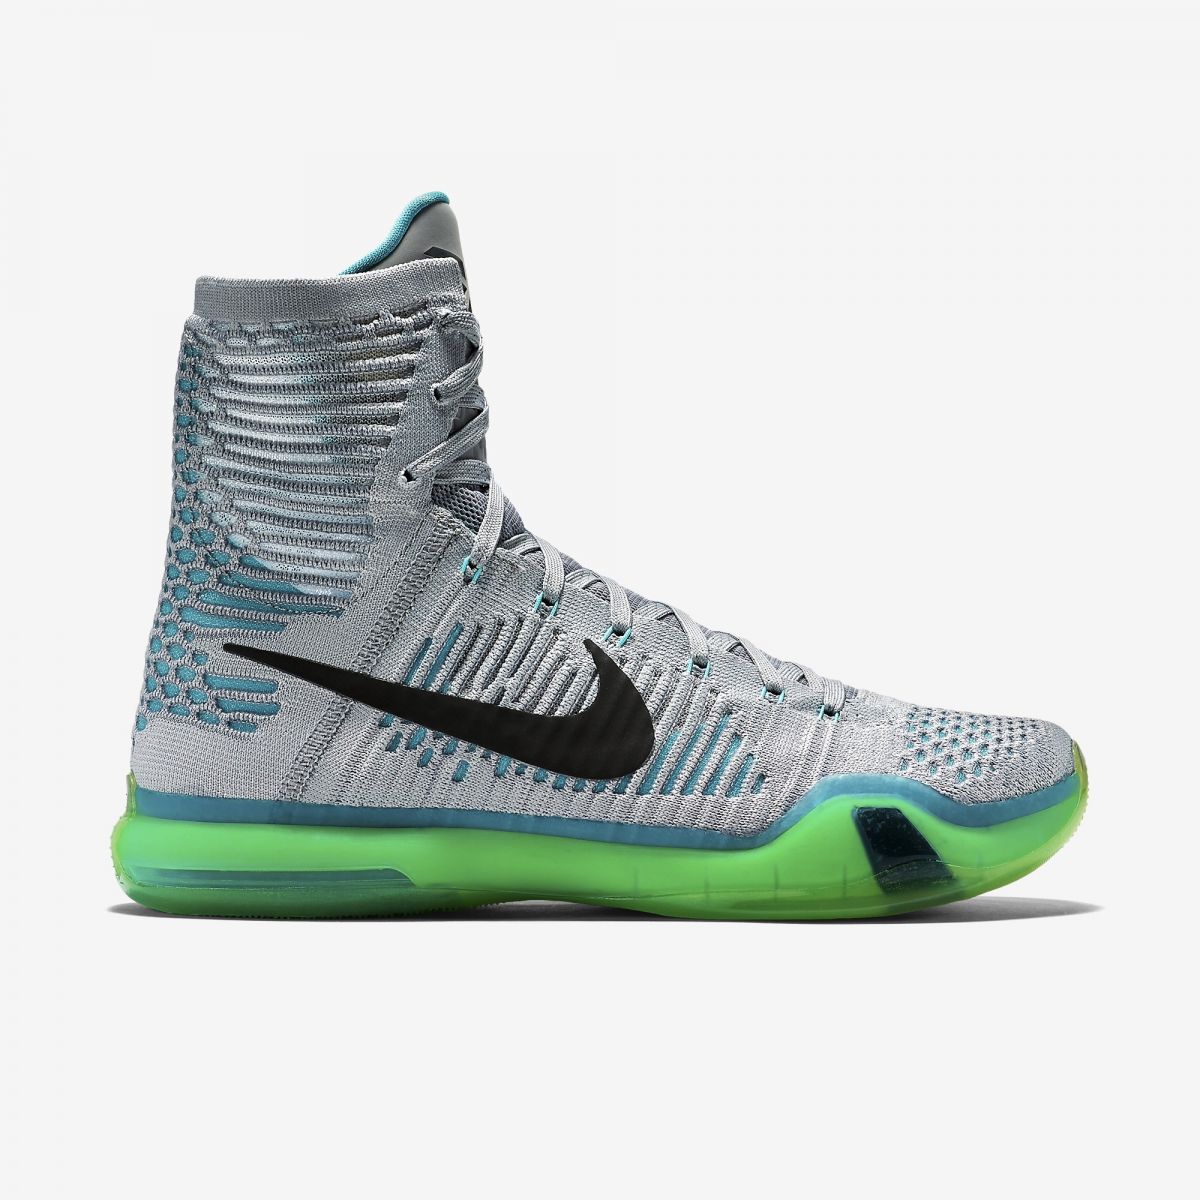 The Complete Guide to the Nike Kobe 10 | Sole Collector1200 x 1200